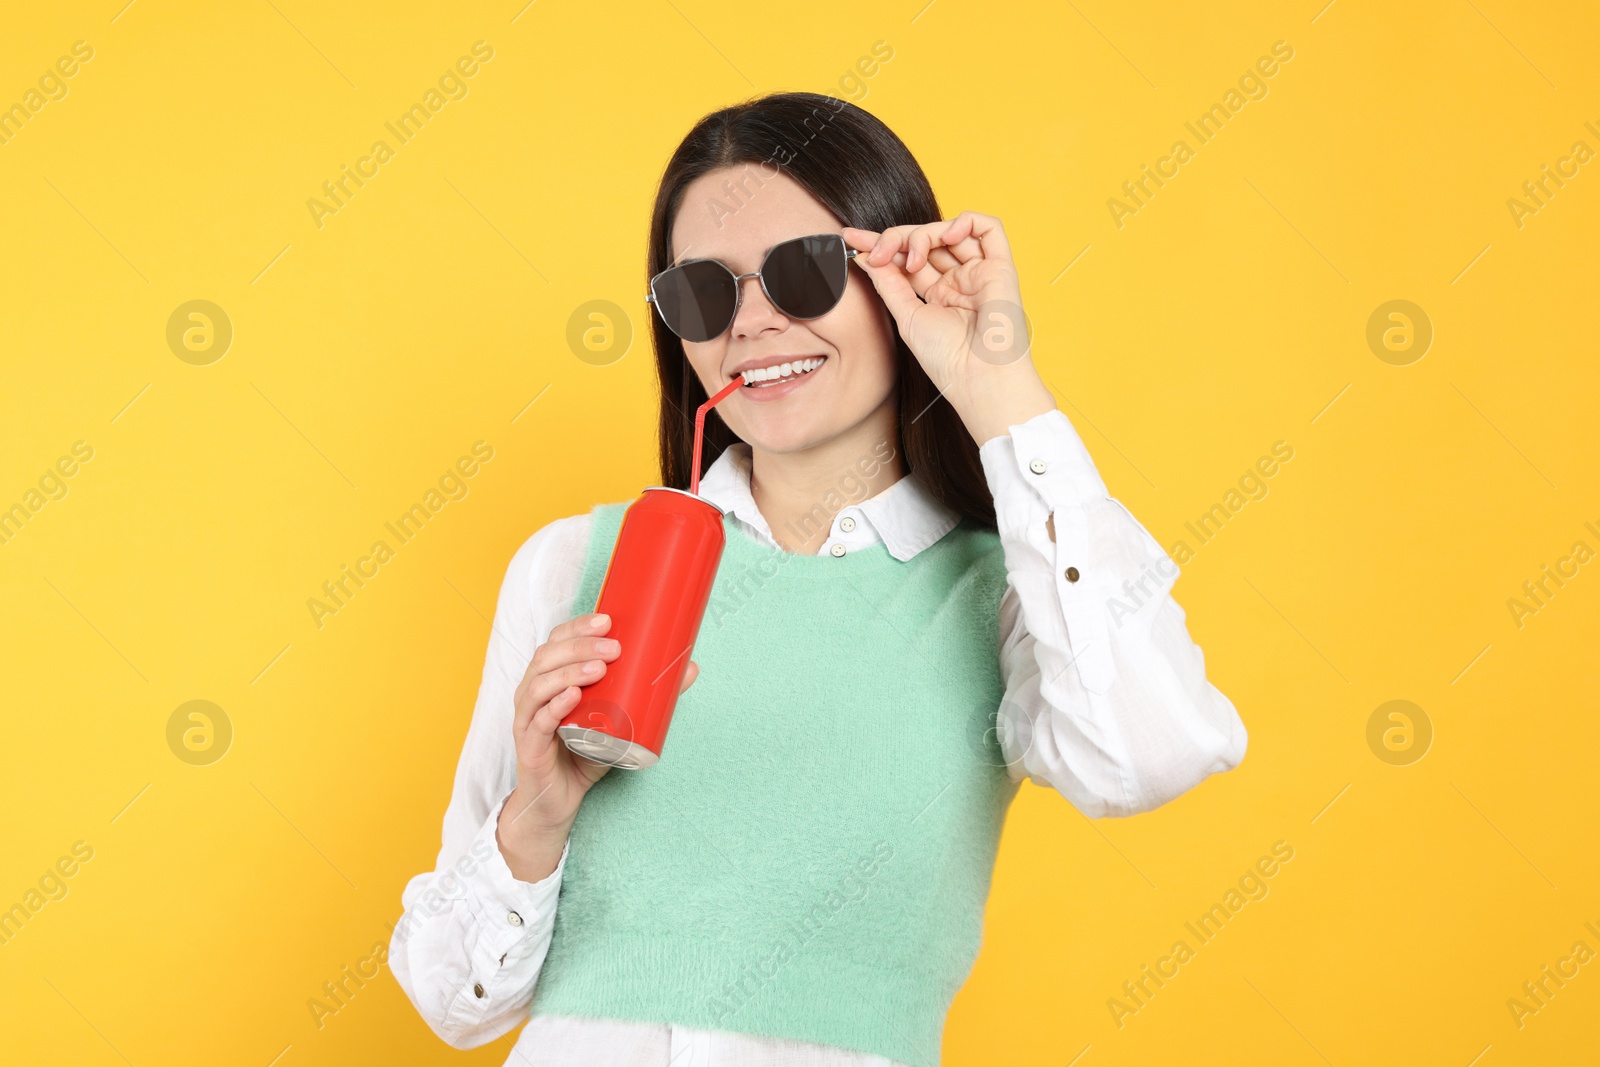 Photo of Beautiful happy woman drinking from red beverage can on yellow background